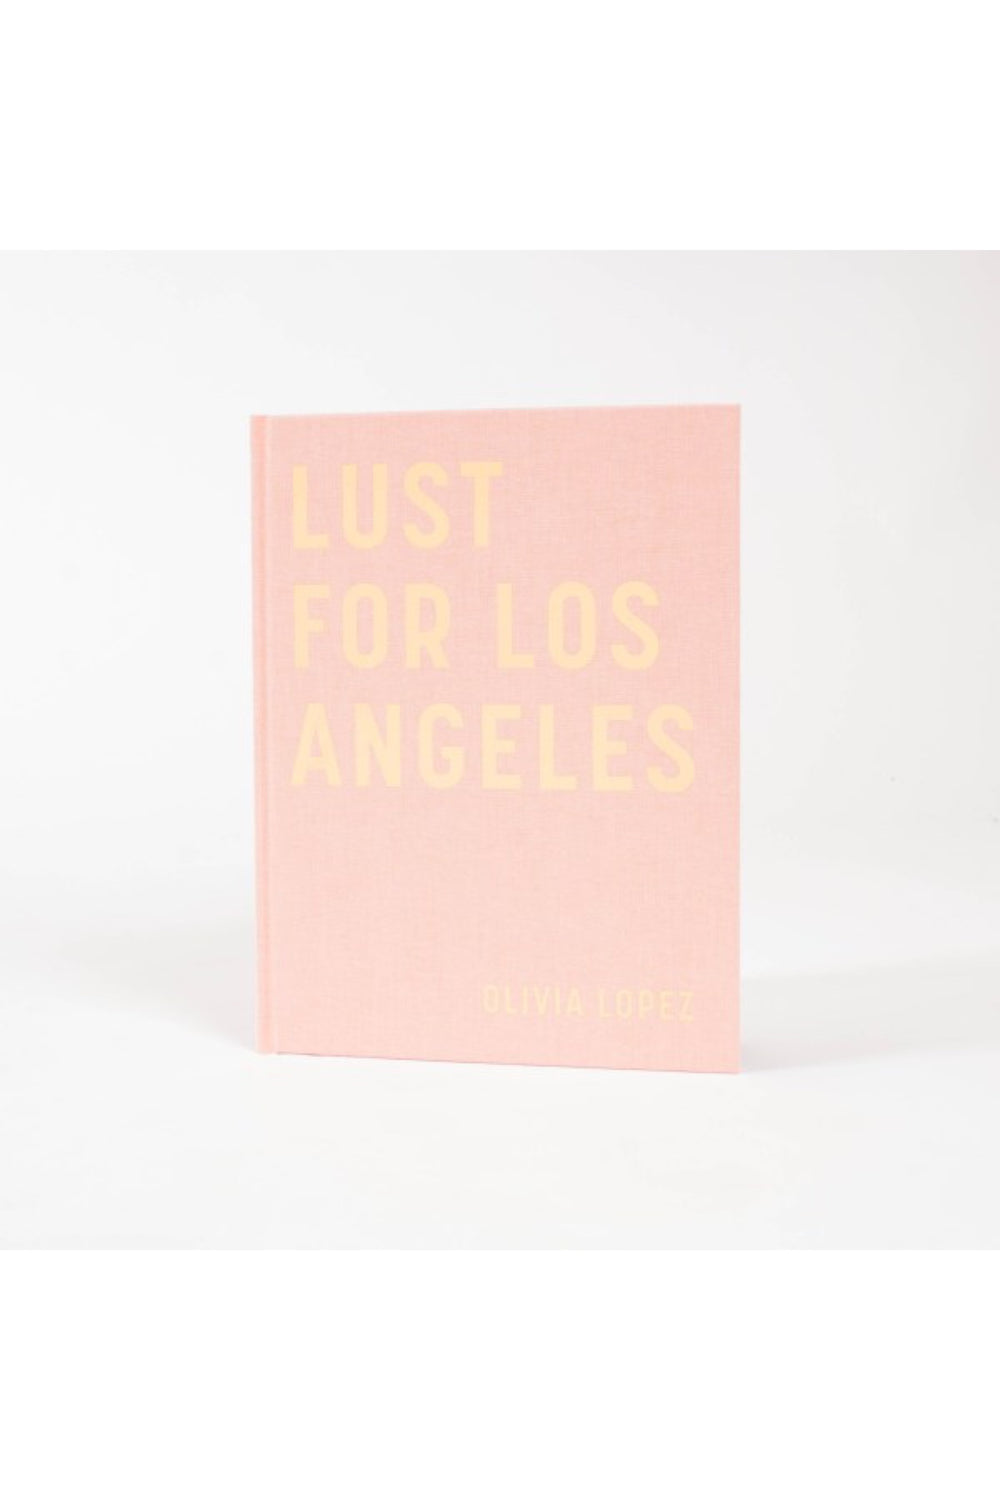 Lust For Los Angeles